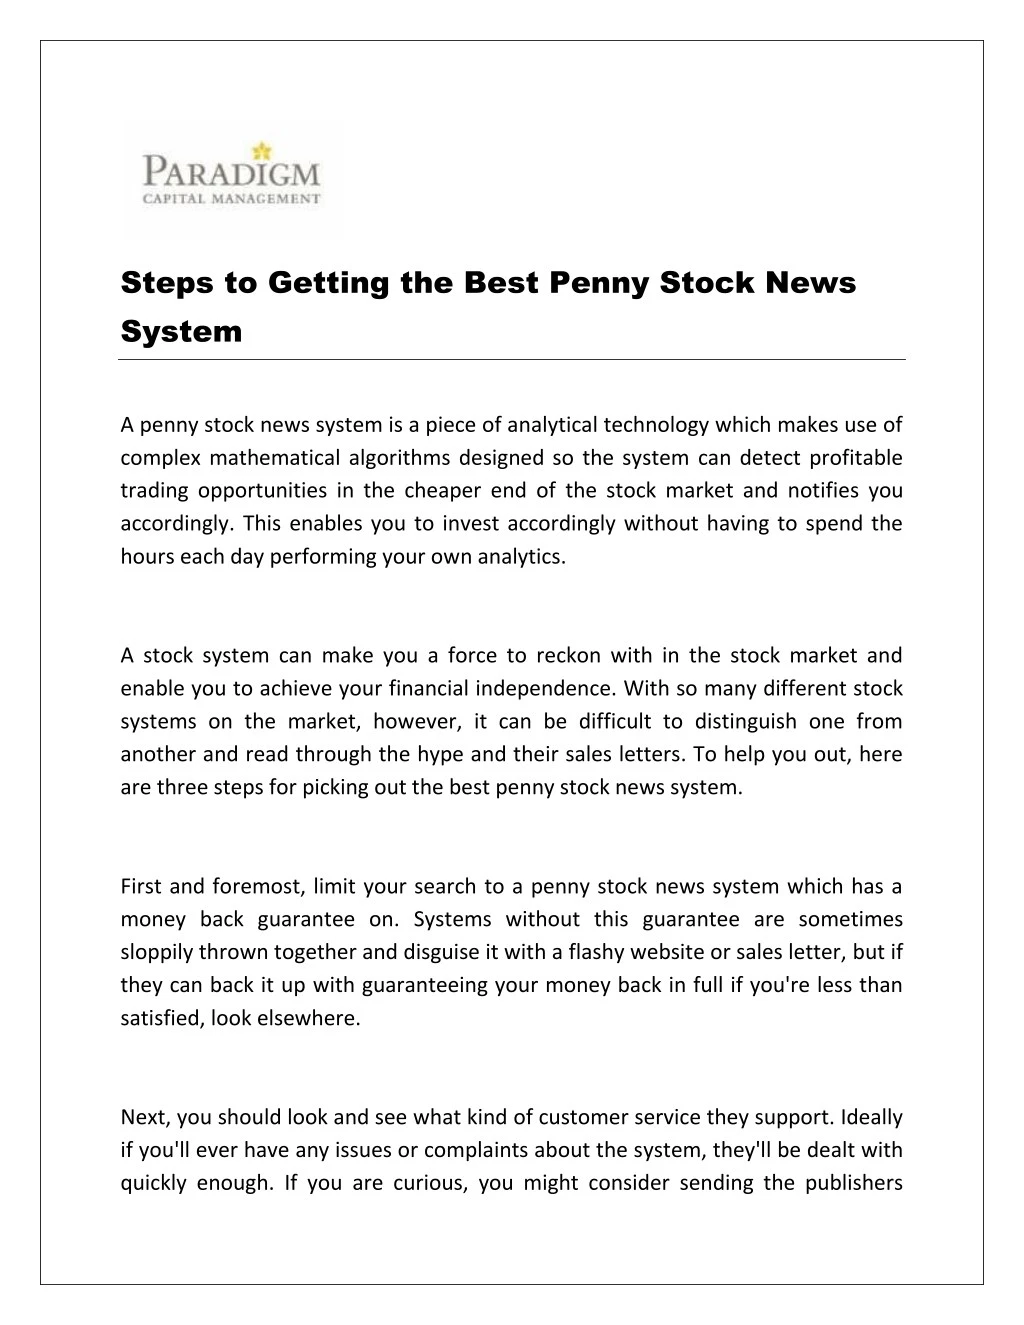 steps to getting the best penny stock news system